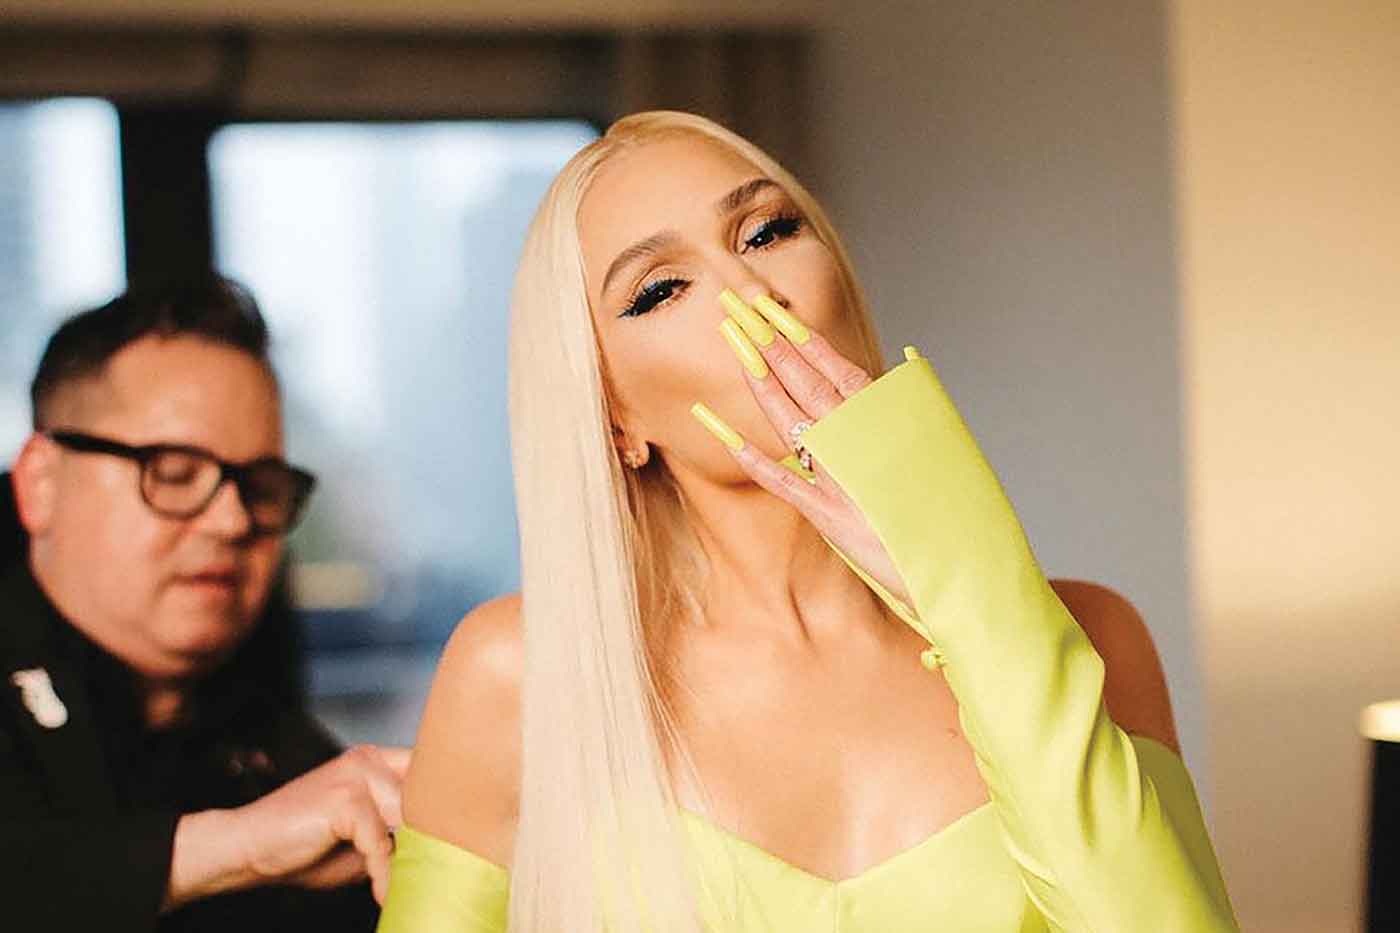 Met Gala 2022 proves long nails are here to stay